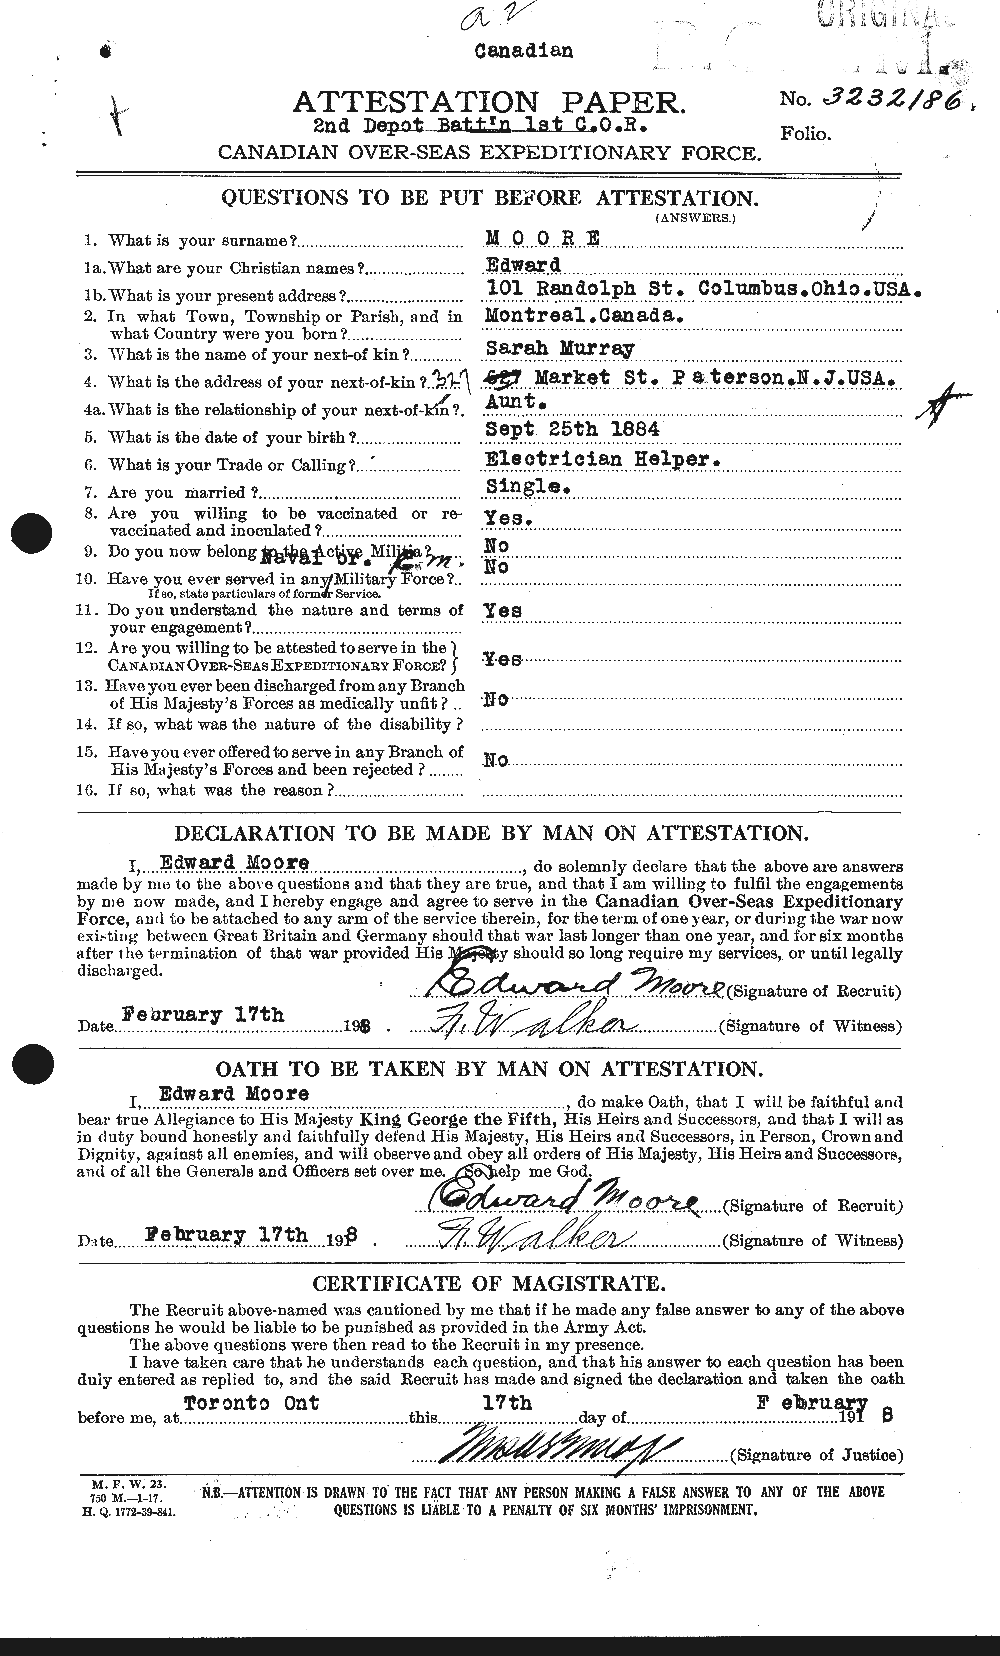 Personnel Records of the First World War - CEF 506617a